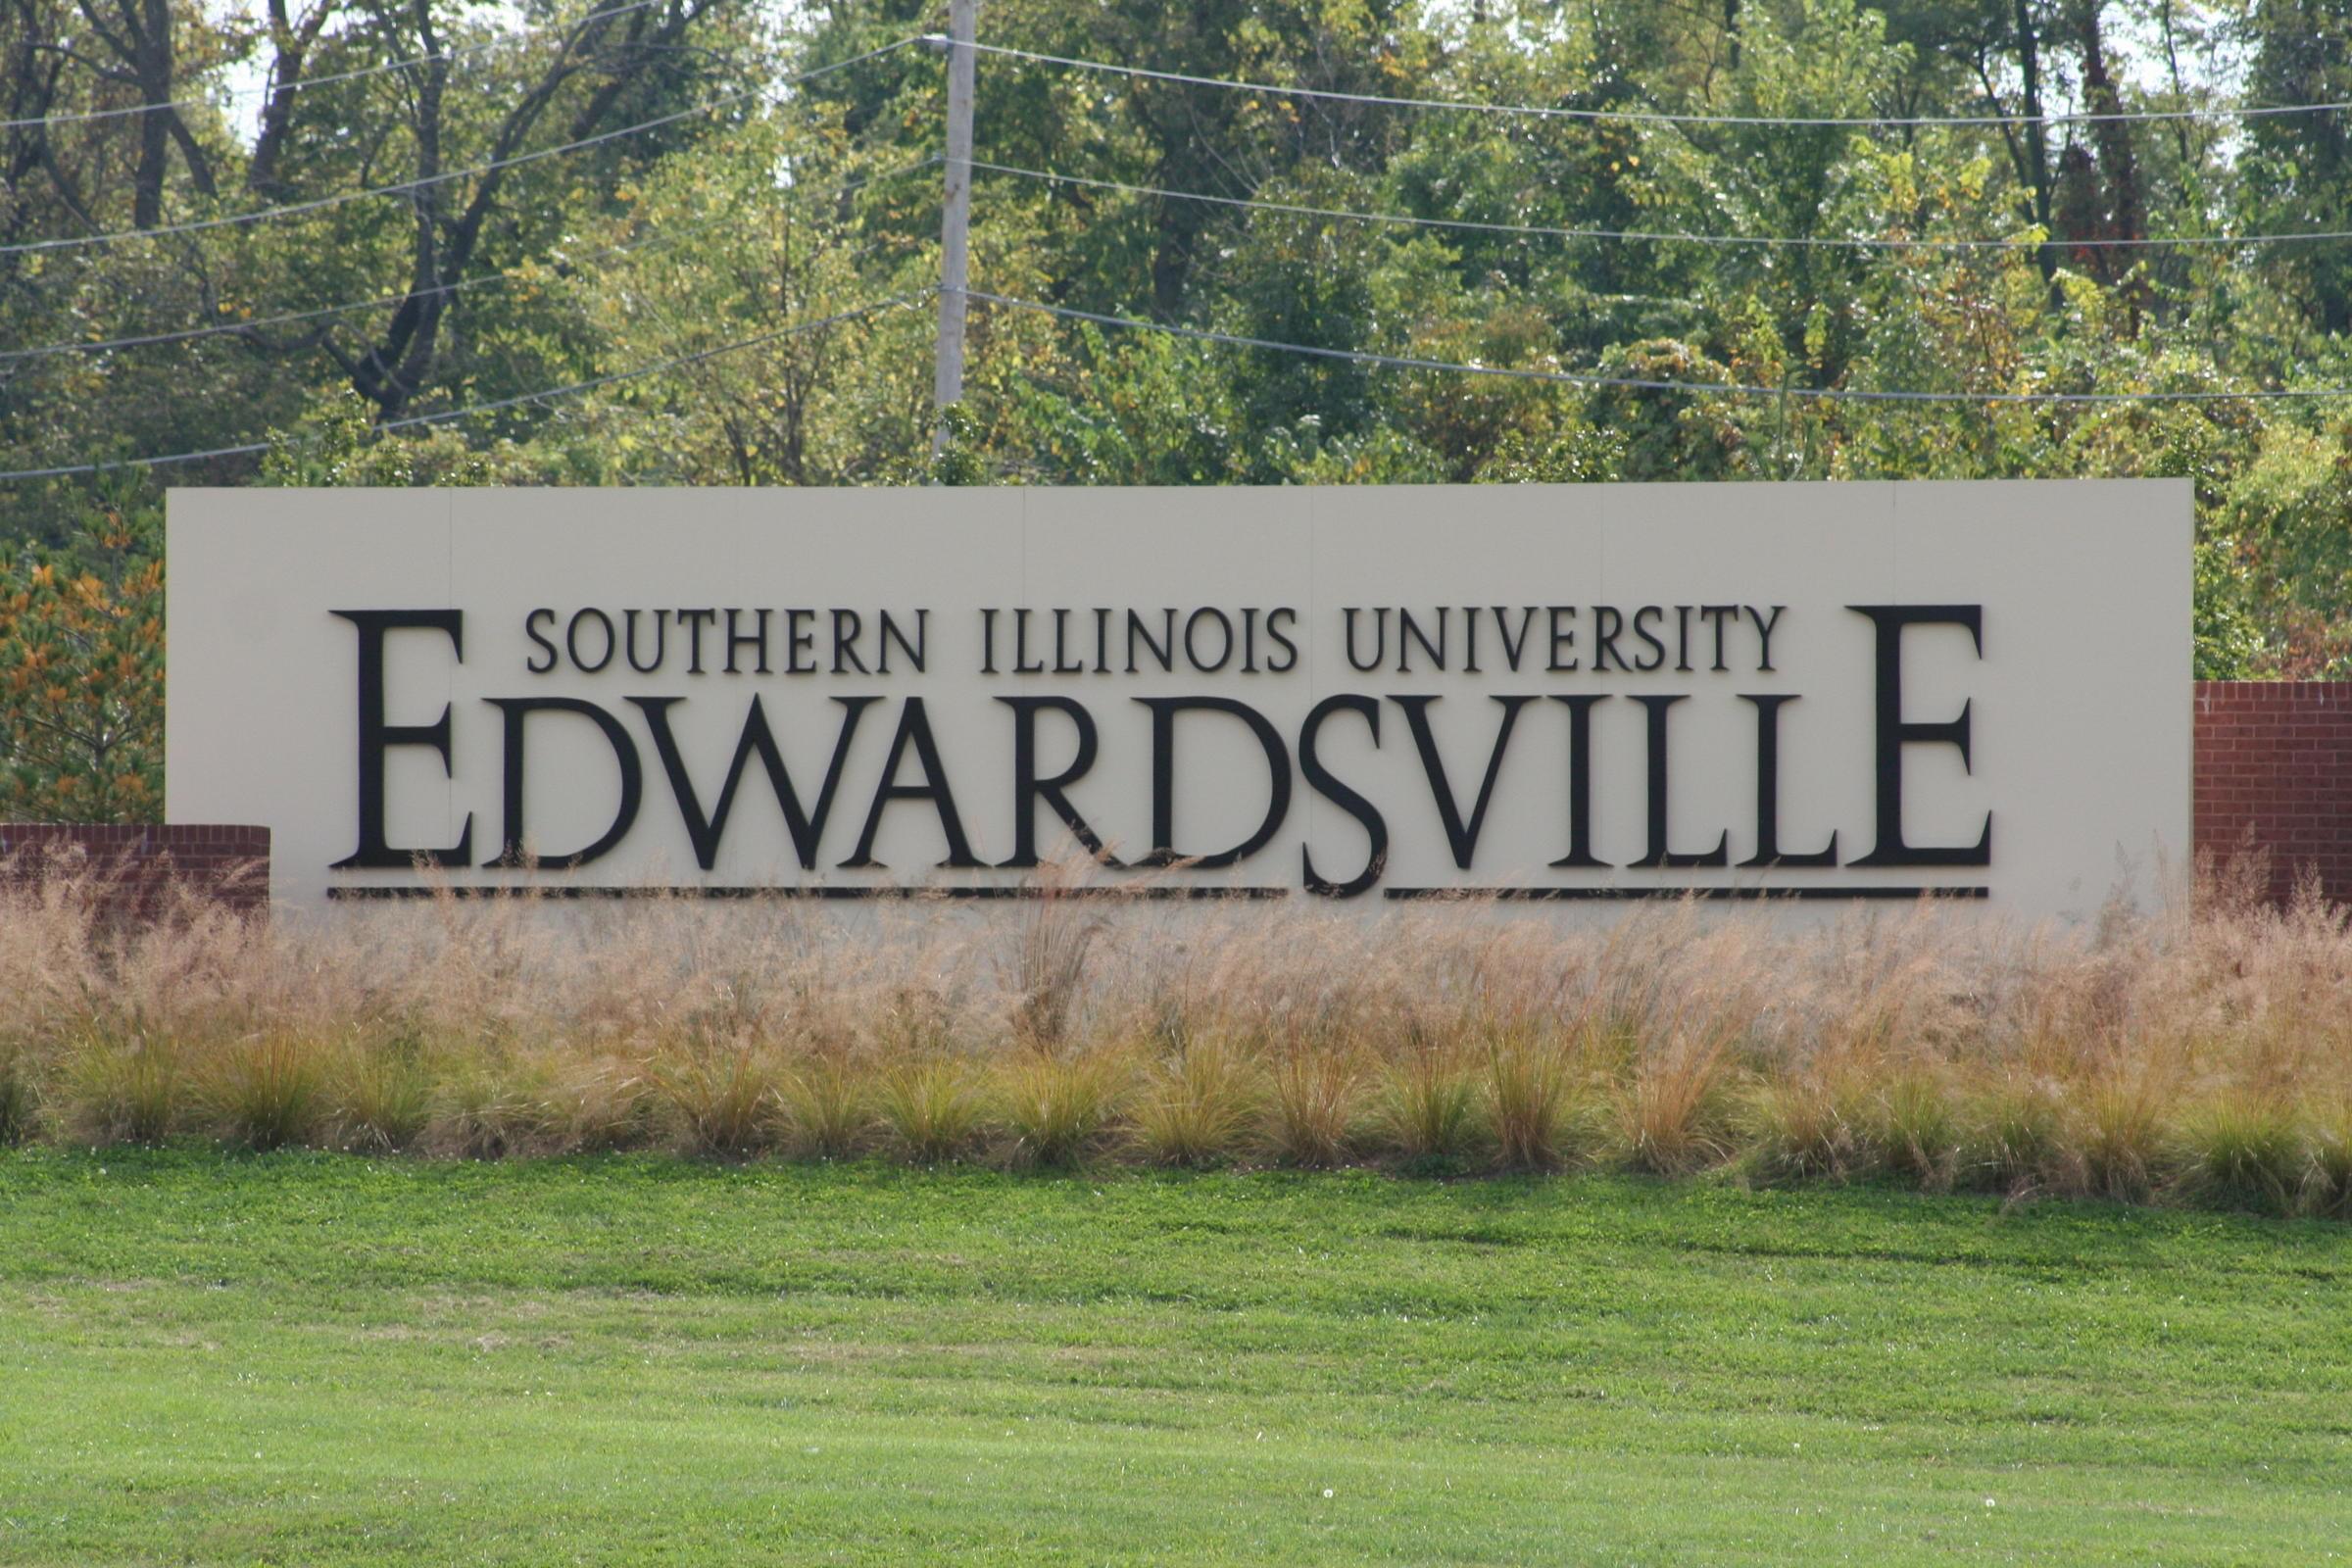 Entrance to the SIU-Edwardsville campus.